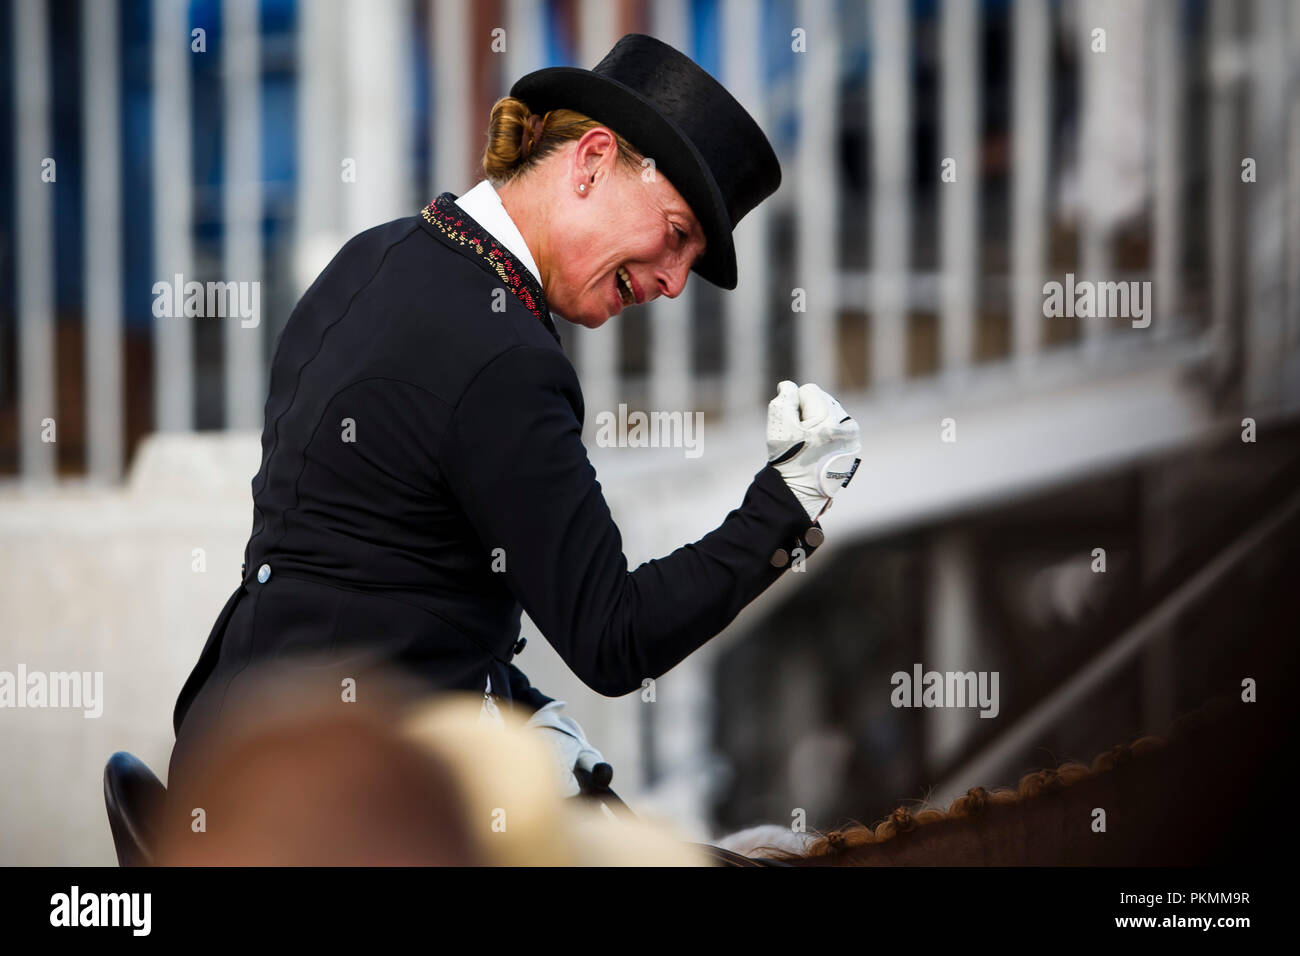 Tryon, USA. 13th Sep, 2018. Equestrian, FEI World Equestrian Game 2018, Grand Prix de Dressage: Isabell Werth cheering while on her horse Bella Rose. Credit: Sharon Vandeput/Sportfoto-Lafrentz/dpa/Alamy Live News Stock Photo